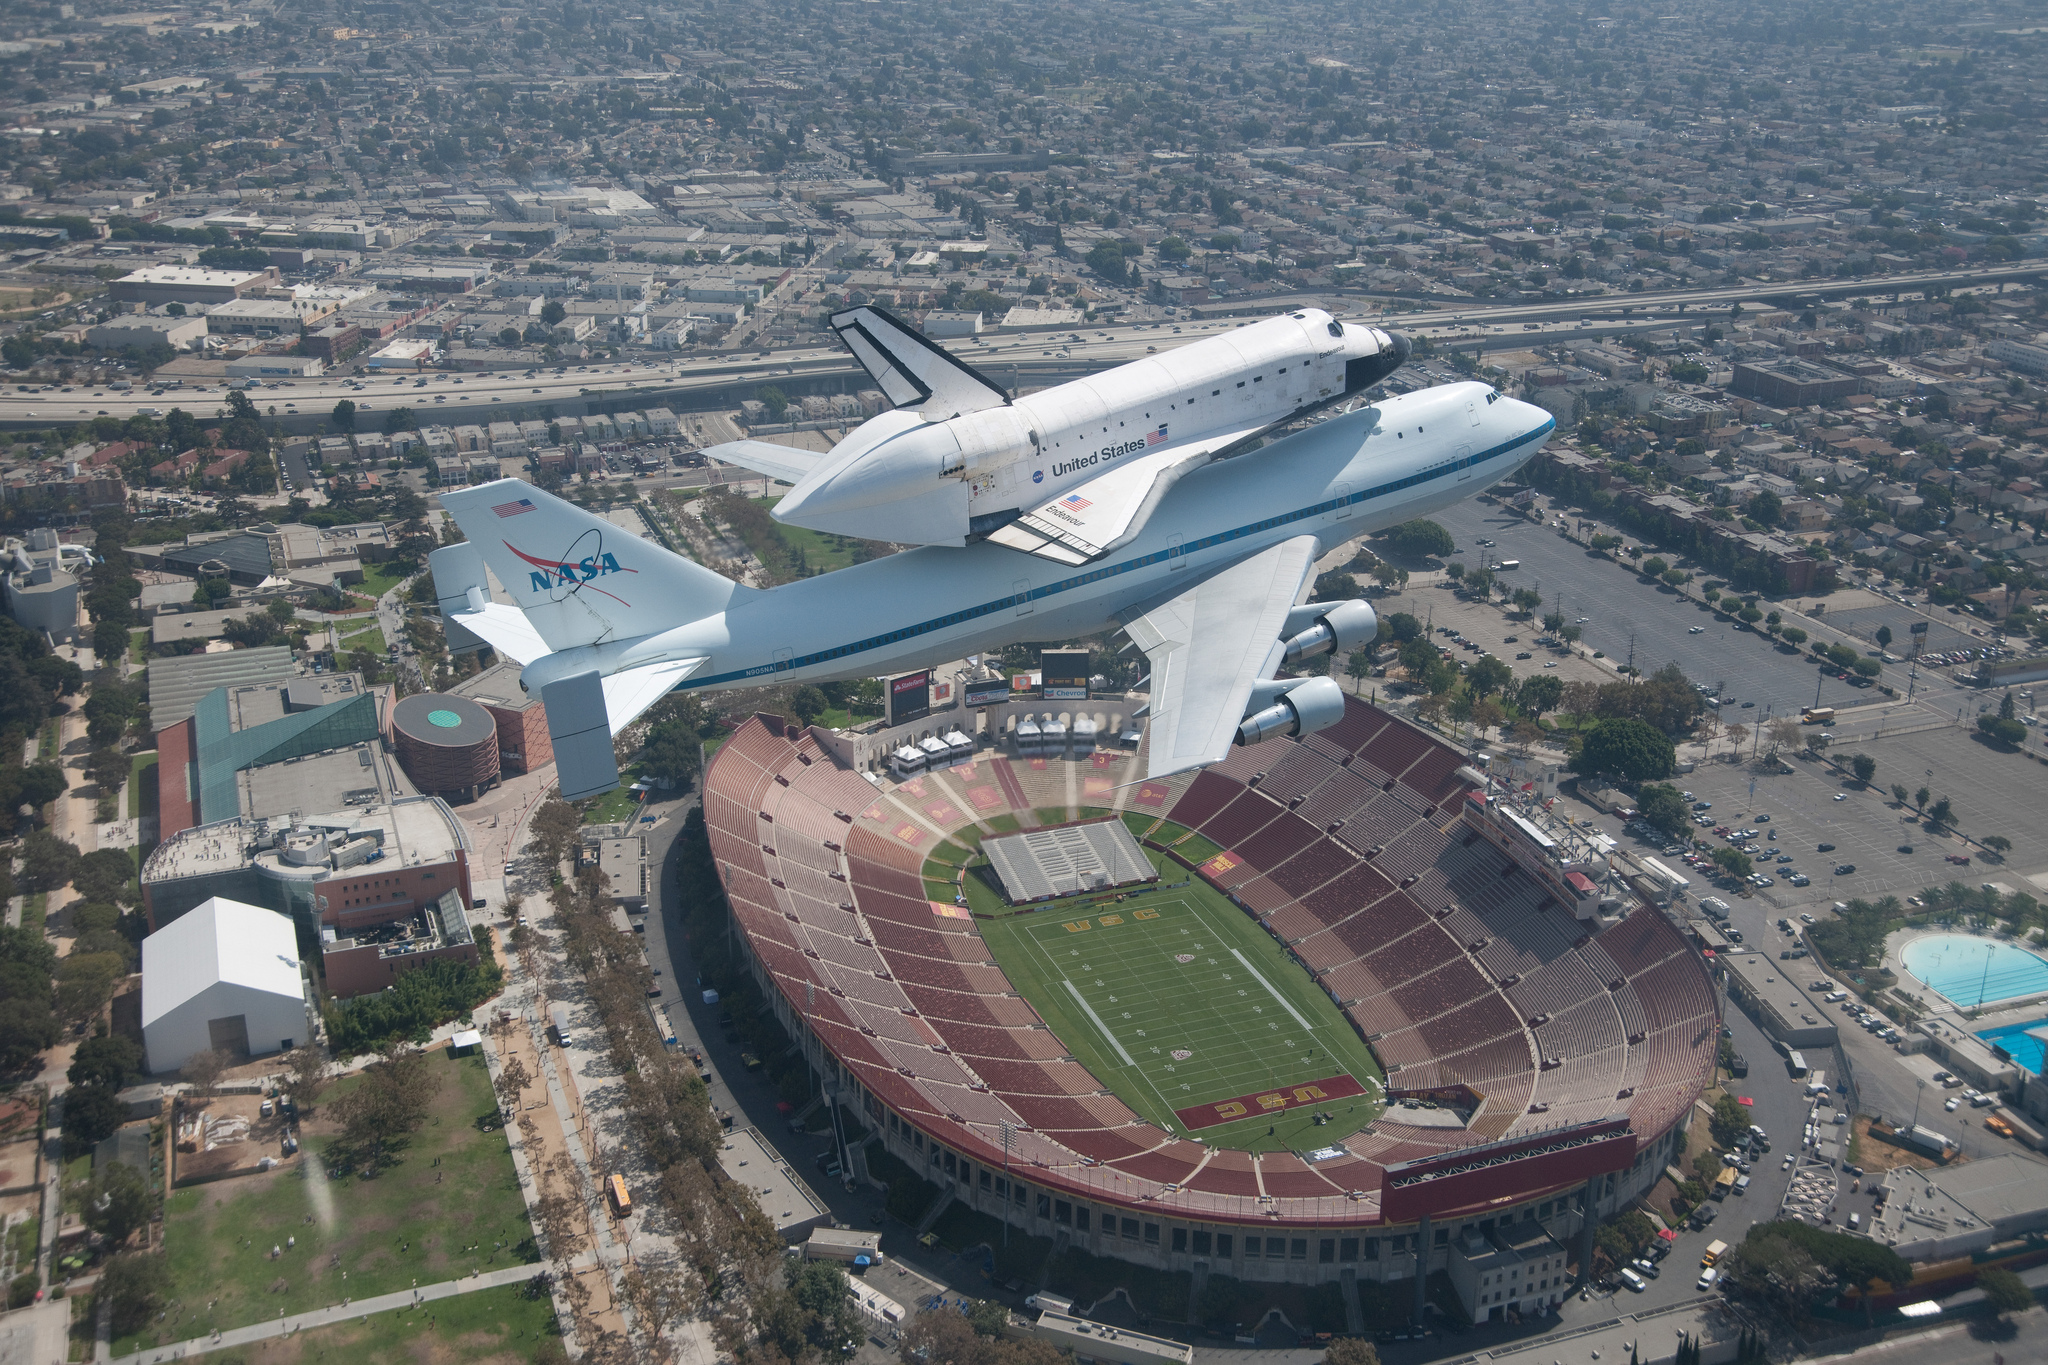 vehicles, space shuttle endeavour, airplane, los angeles, nasa, shuttle, space shuttle, stadium, space shuttles